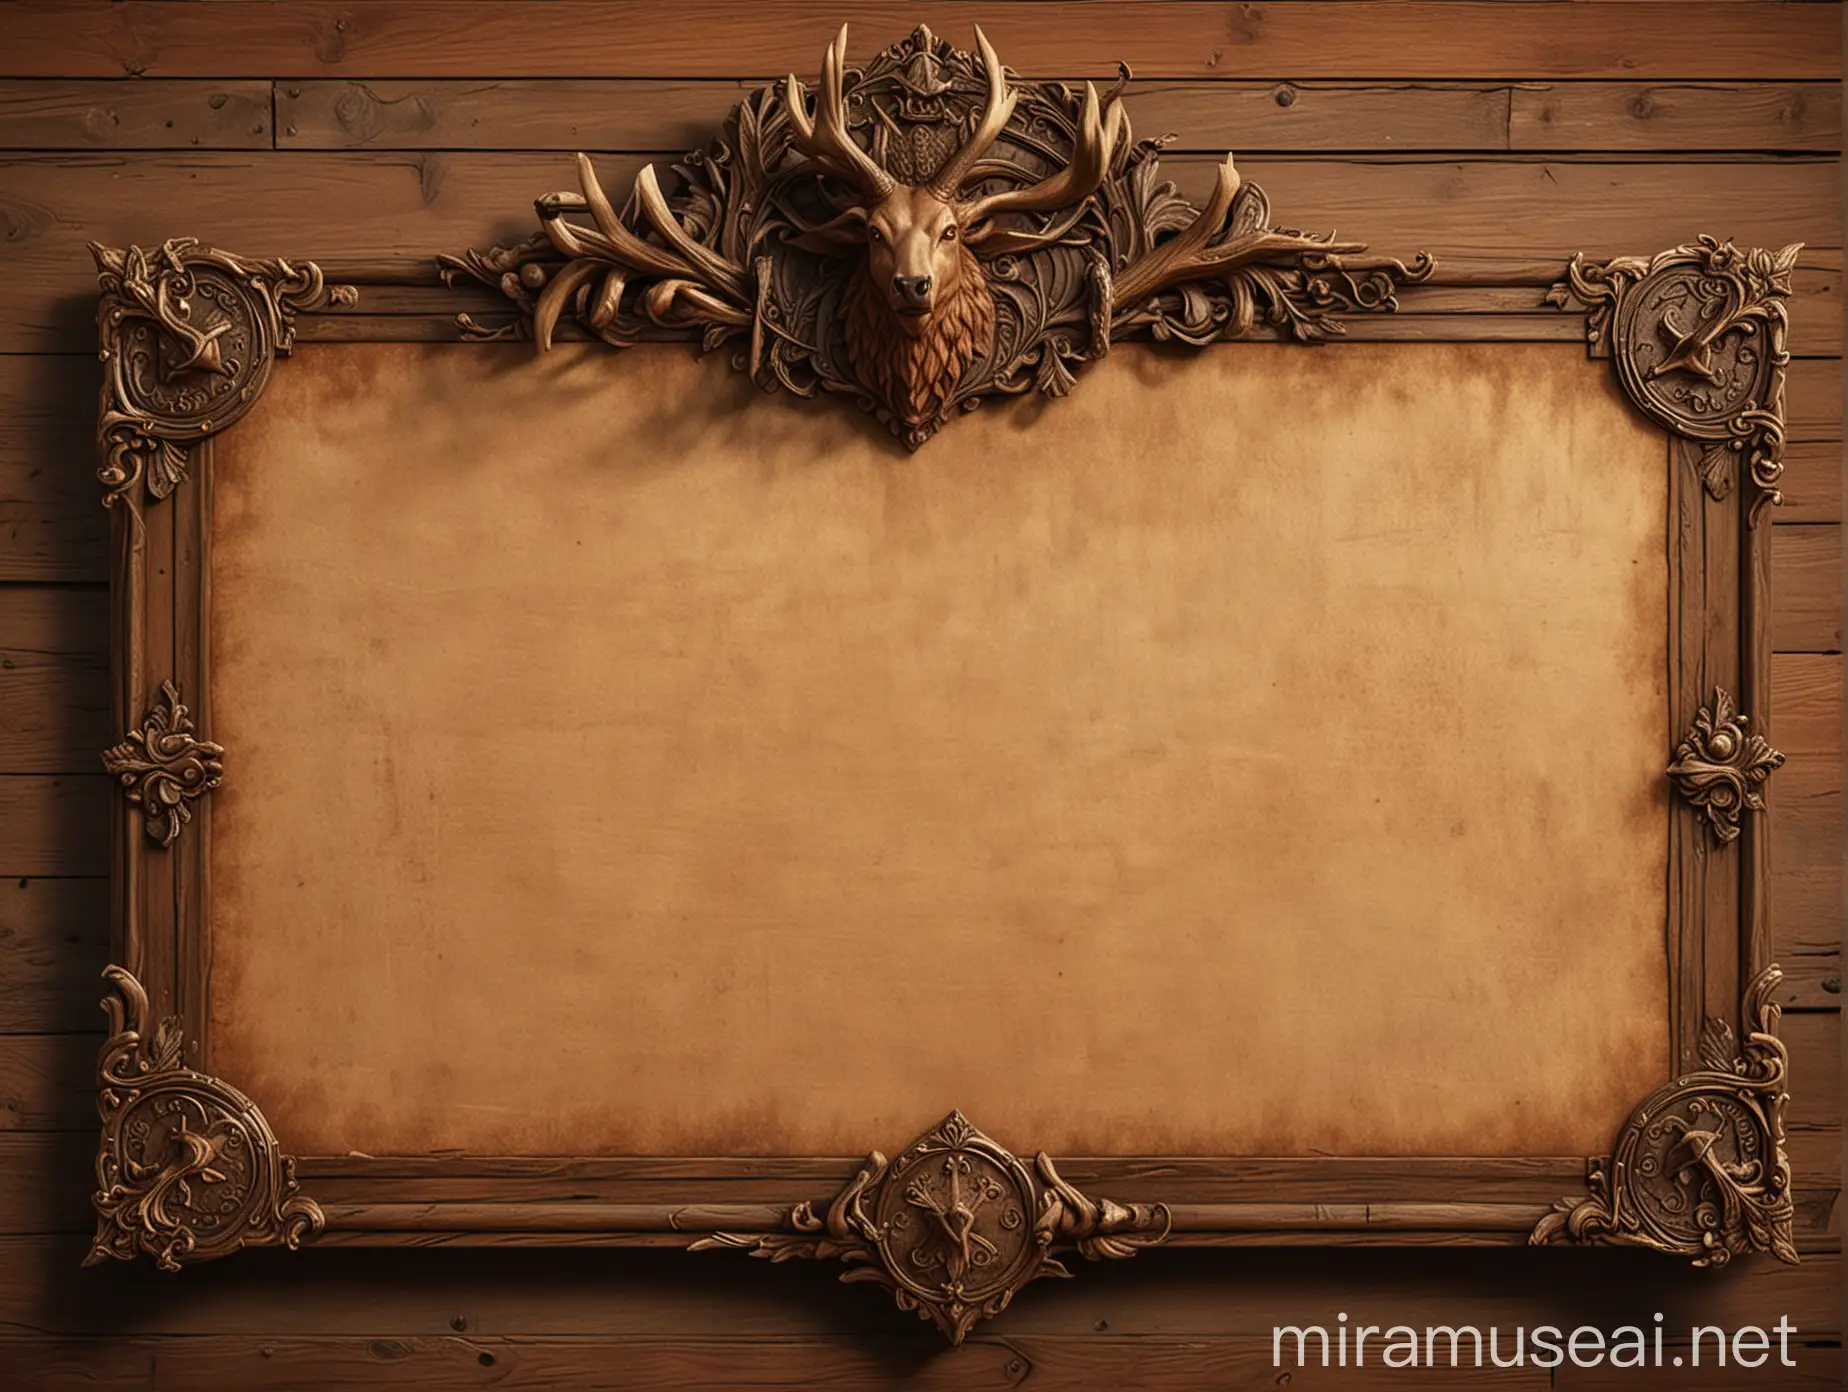 Create a banner image for a fantasy game guild. The image should depict a wooden notice board with an ornate top section that has a shield-shaped crest in the center featuring a stag's head. The notice board itself should be blank, allowing for text to be added later.  The overall dimensions of the image should be 1920x1080 pixels. Use a warm, earthy color palette with natural wood tones. Include detailed textures and weathering effects to make the notice board look authentic and aged. Pay close attention to lighting and shadows to make the design look realistic and three-dimensional.  The focus should be on the ornate top section and the blank notice board area. Avoid overly busy or cluttered backgrounds that would distract from the main elements.  Provide the image in a high-quality format (e.g. PNG) suitable for use in a video game or website.